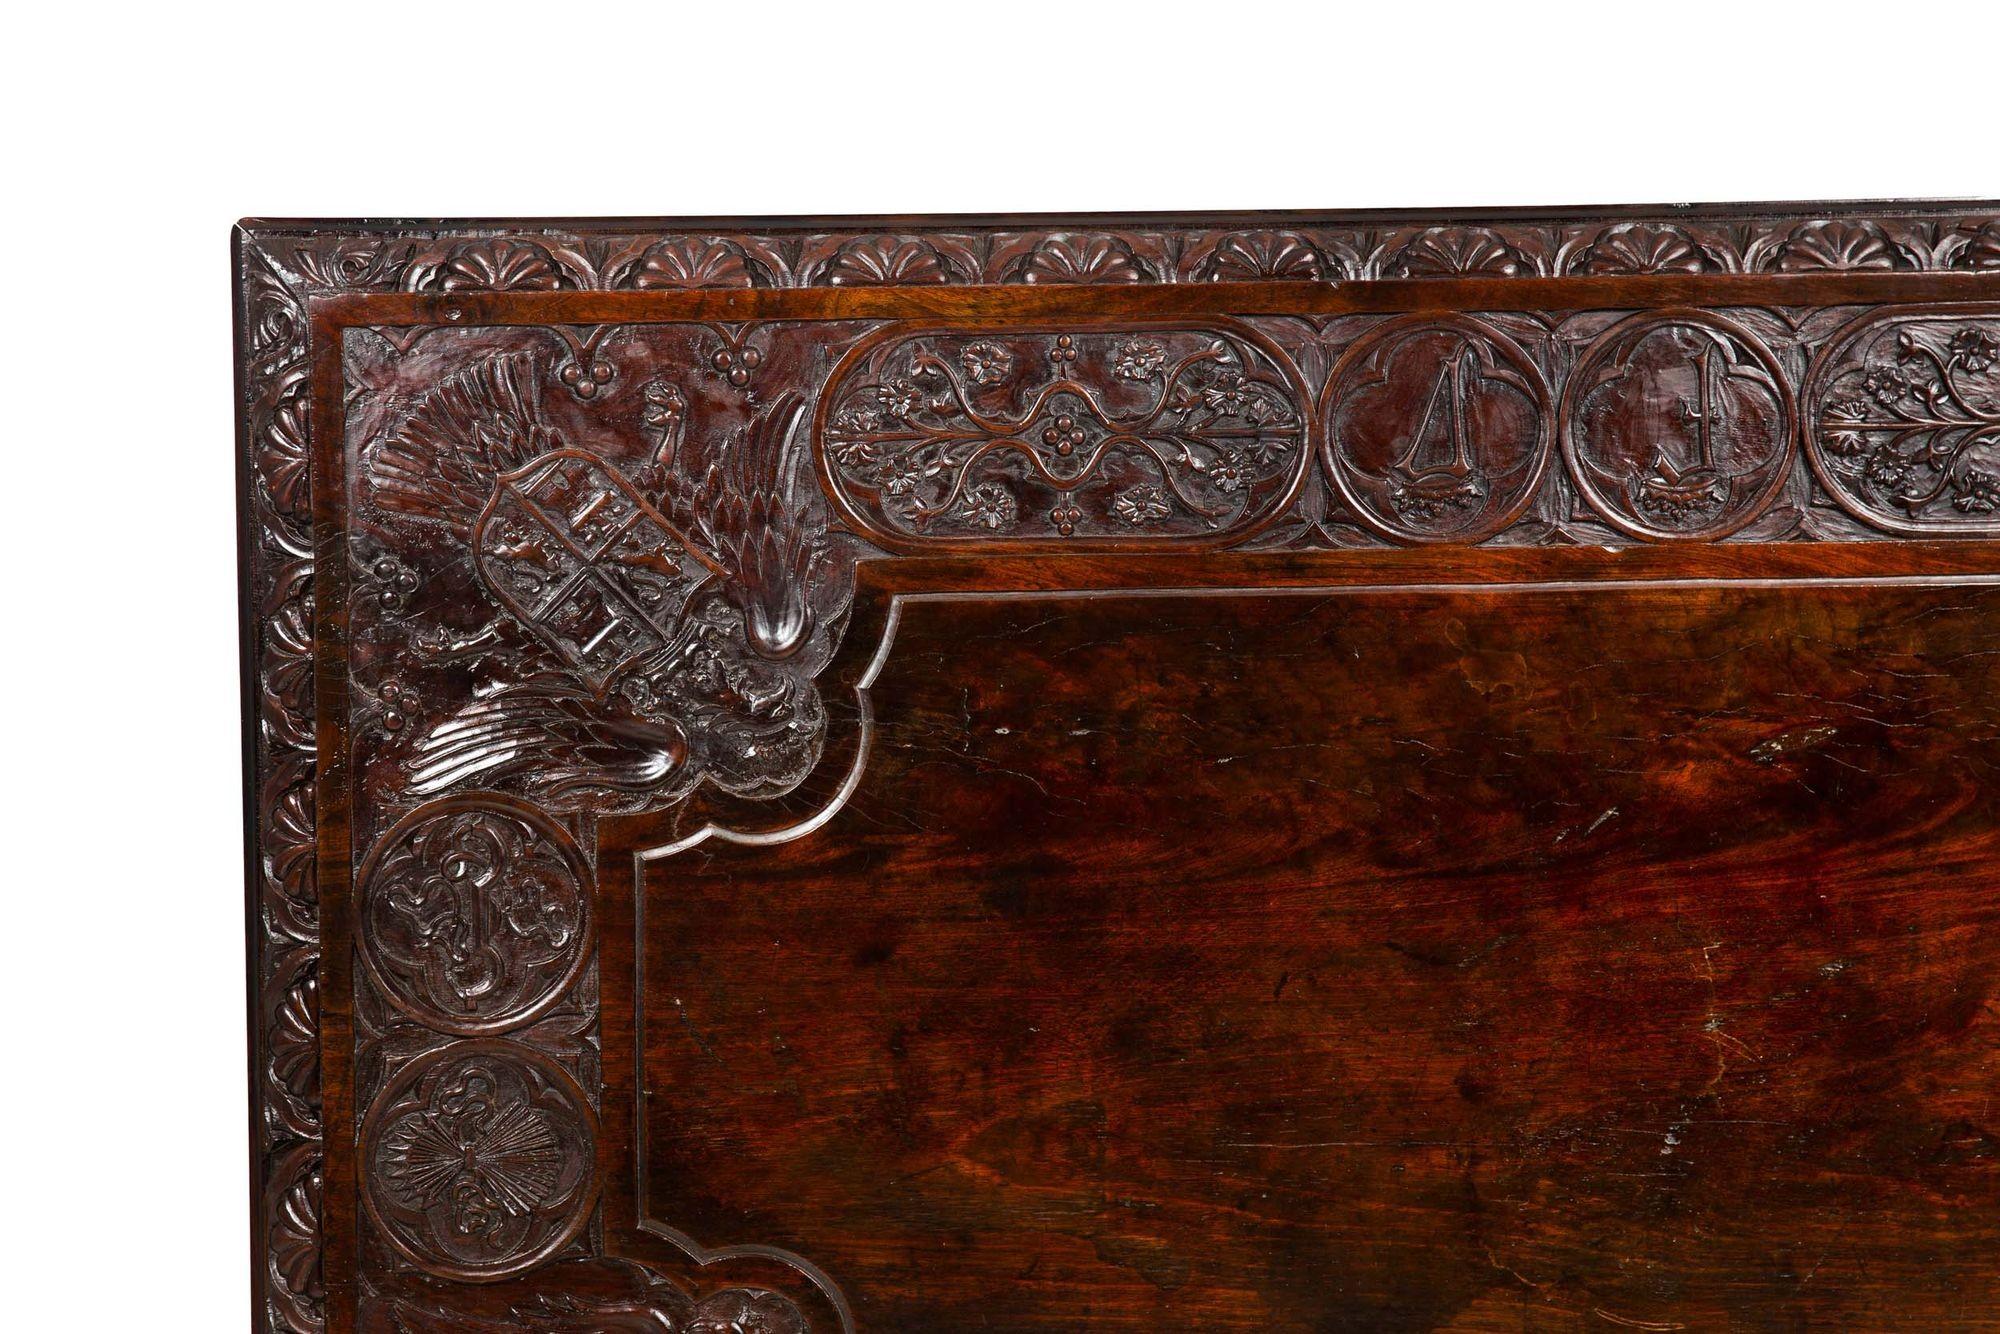 Circa 1900 Gothic Revival Antique Carved Walnut Library Table For Sale 6